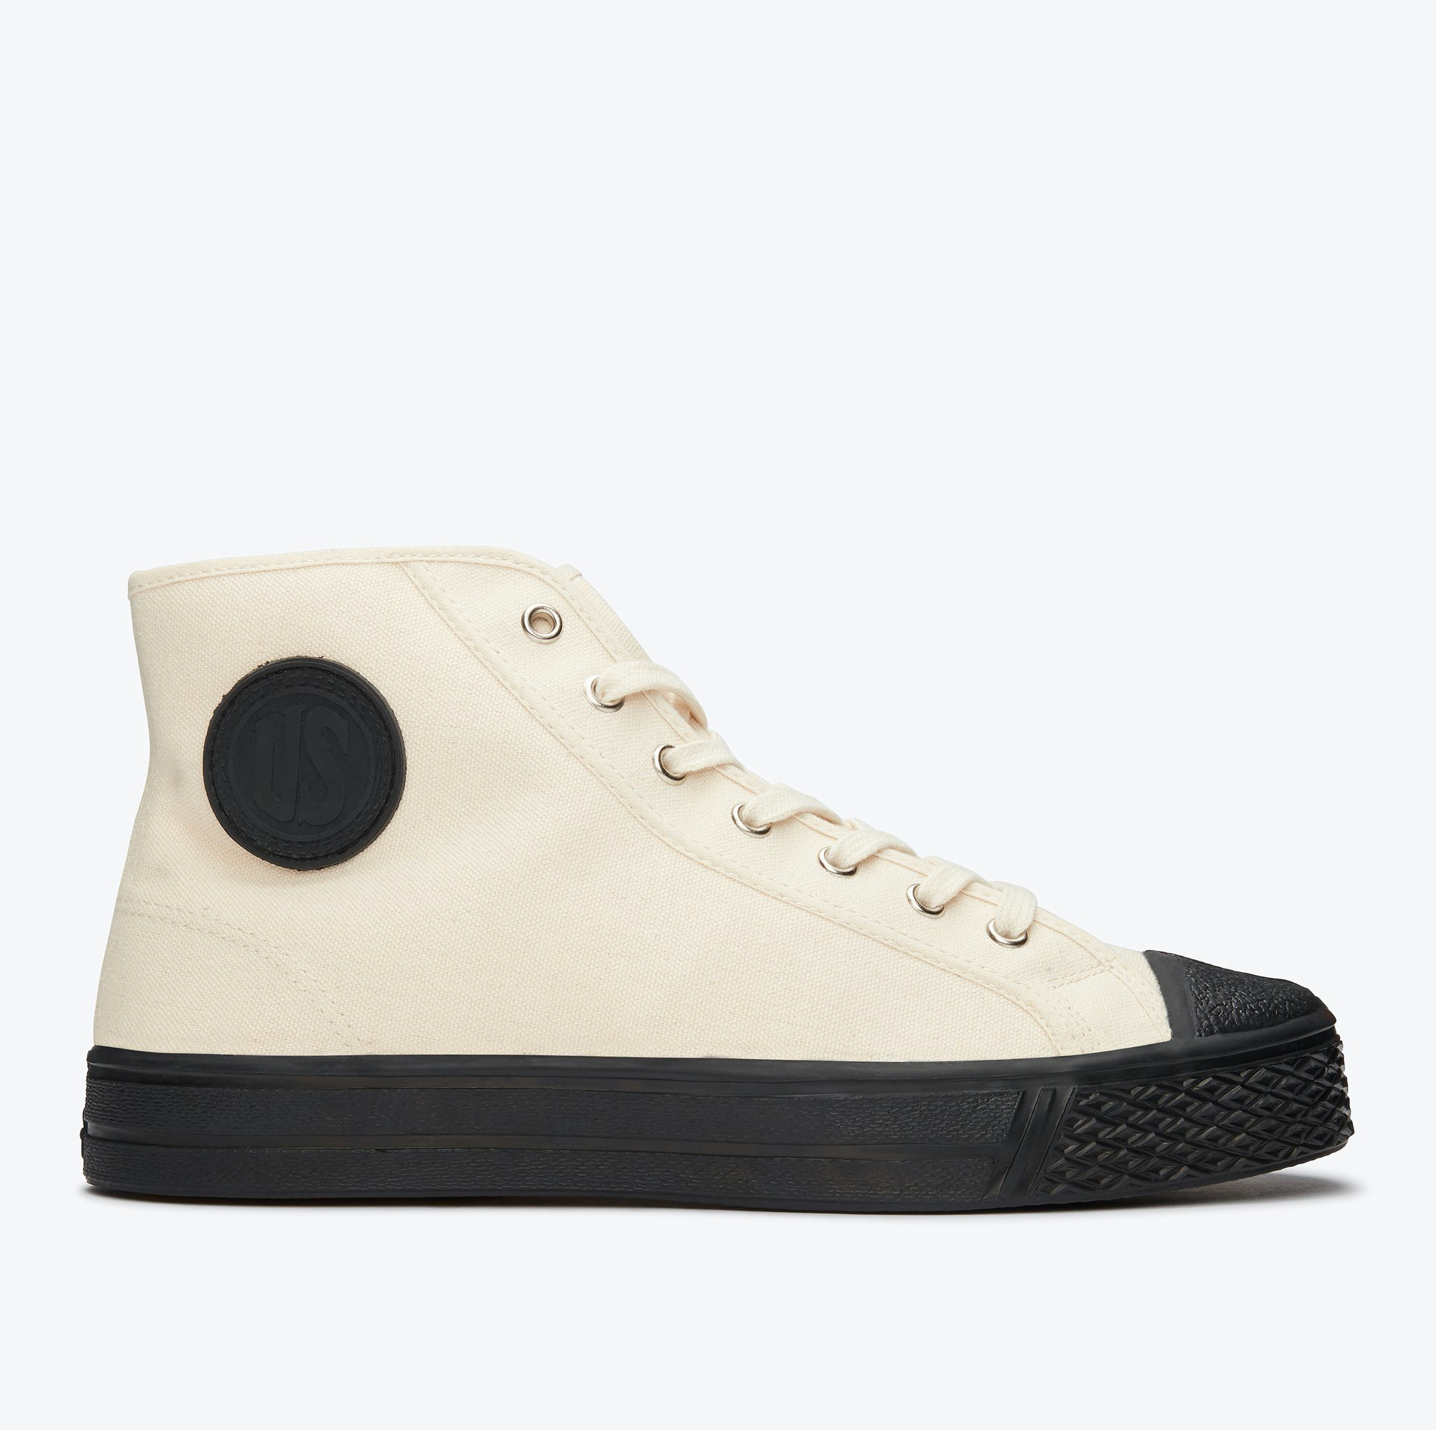 US RUBBER CO HIGH TOP SNEAKER OFF WHITE